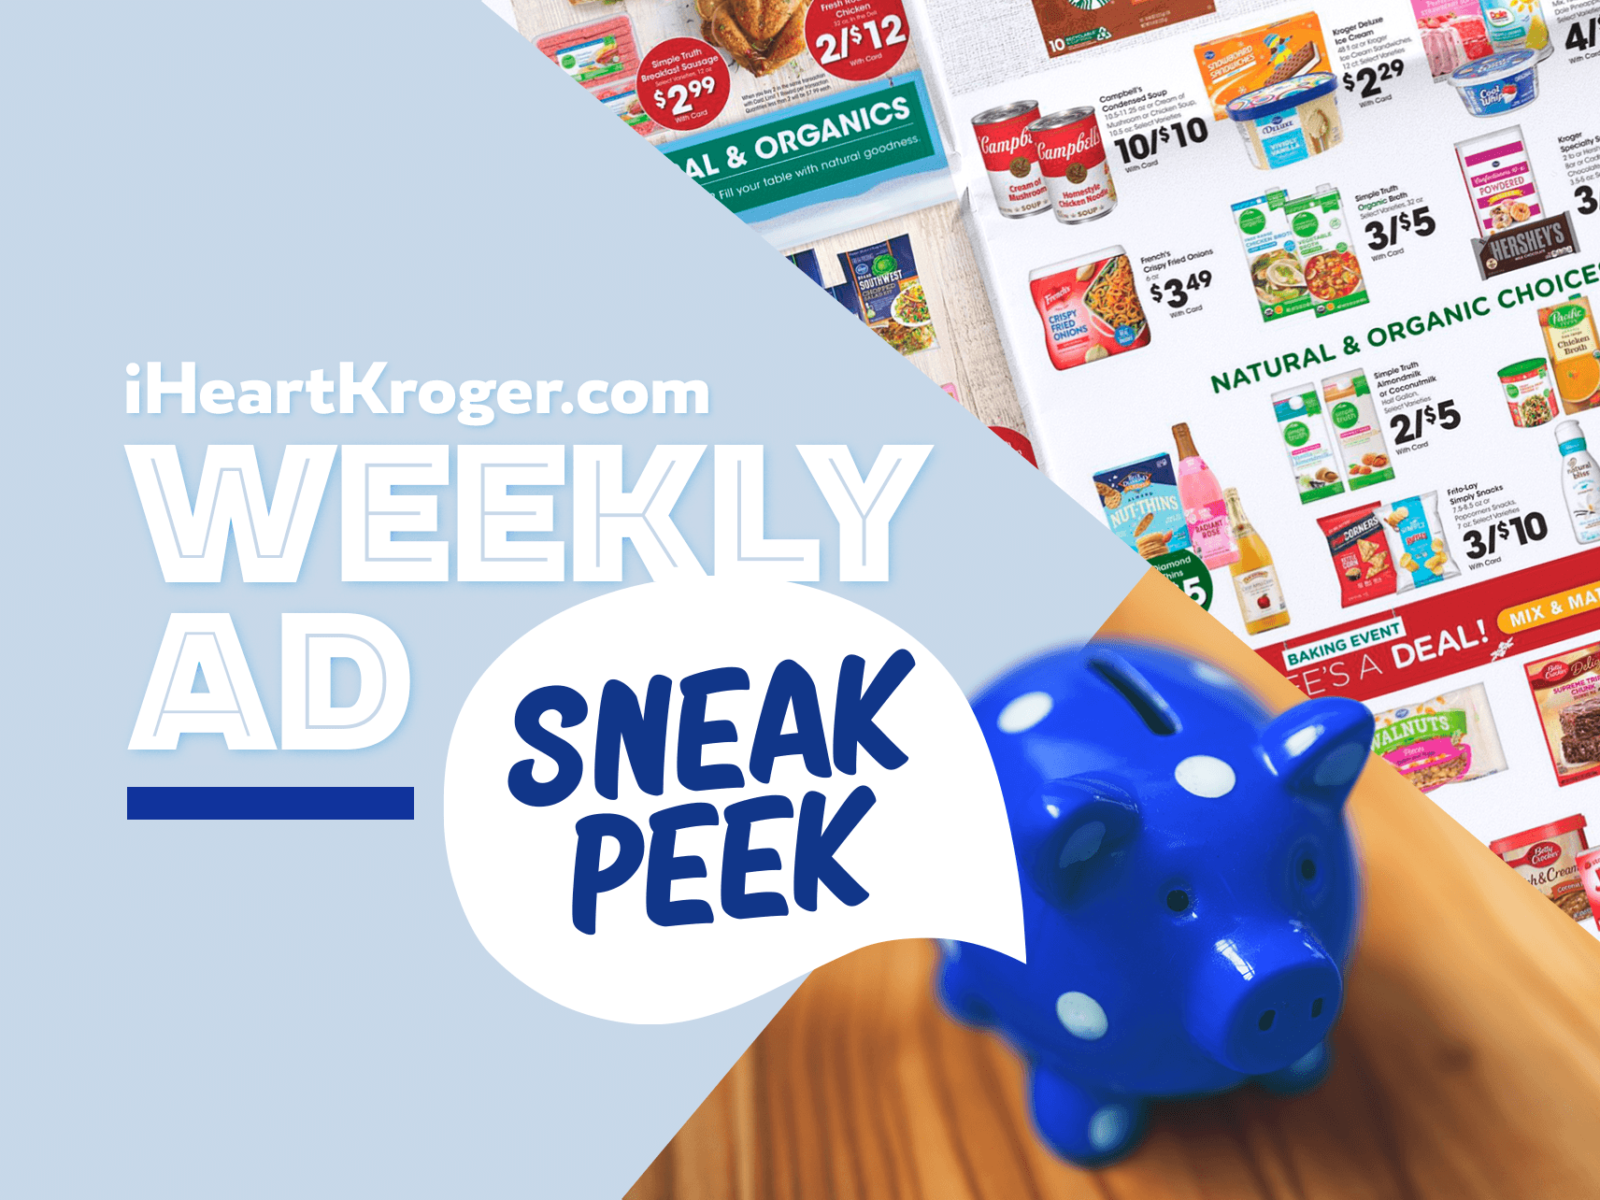 Kroger Ad & Coupons Week Of 10/12 to 10/18 – Mega Sale Continues